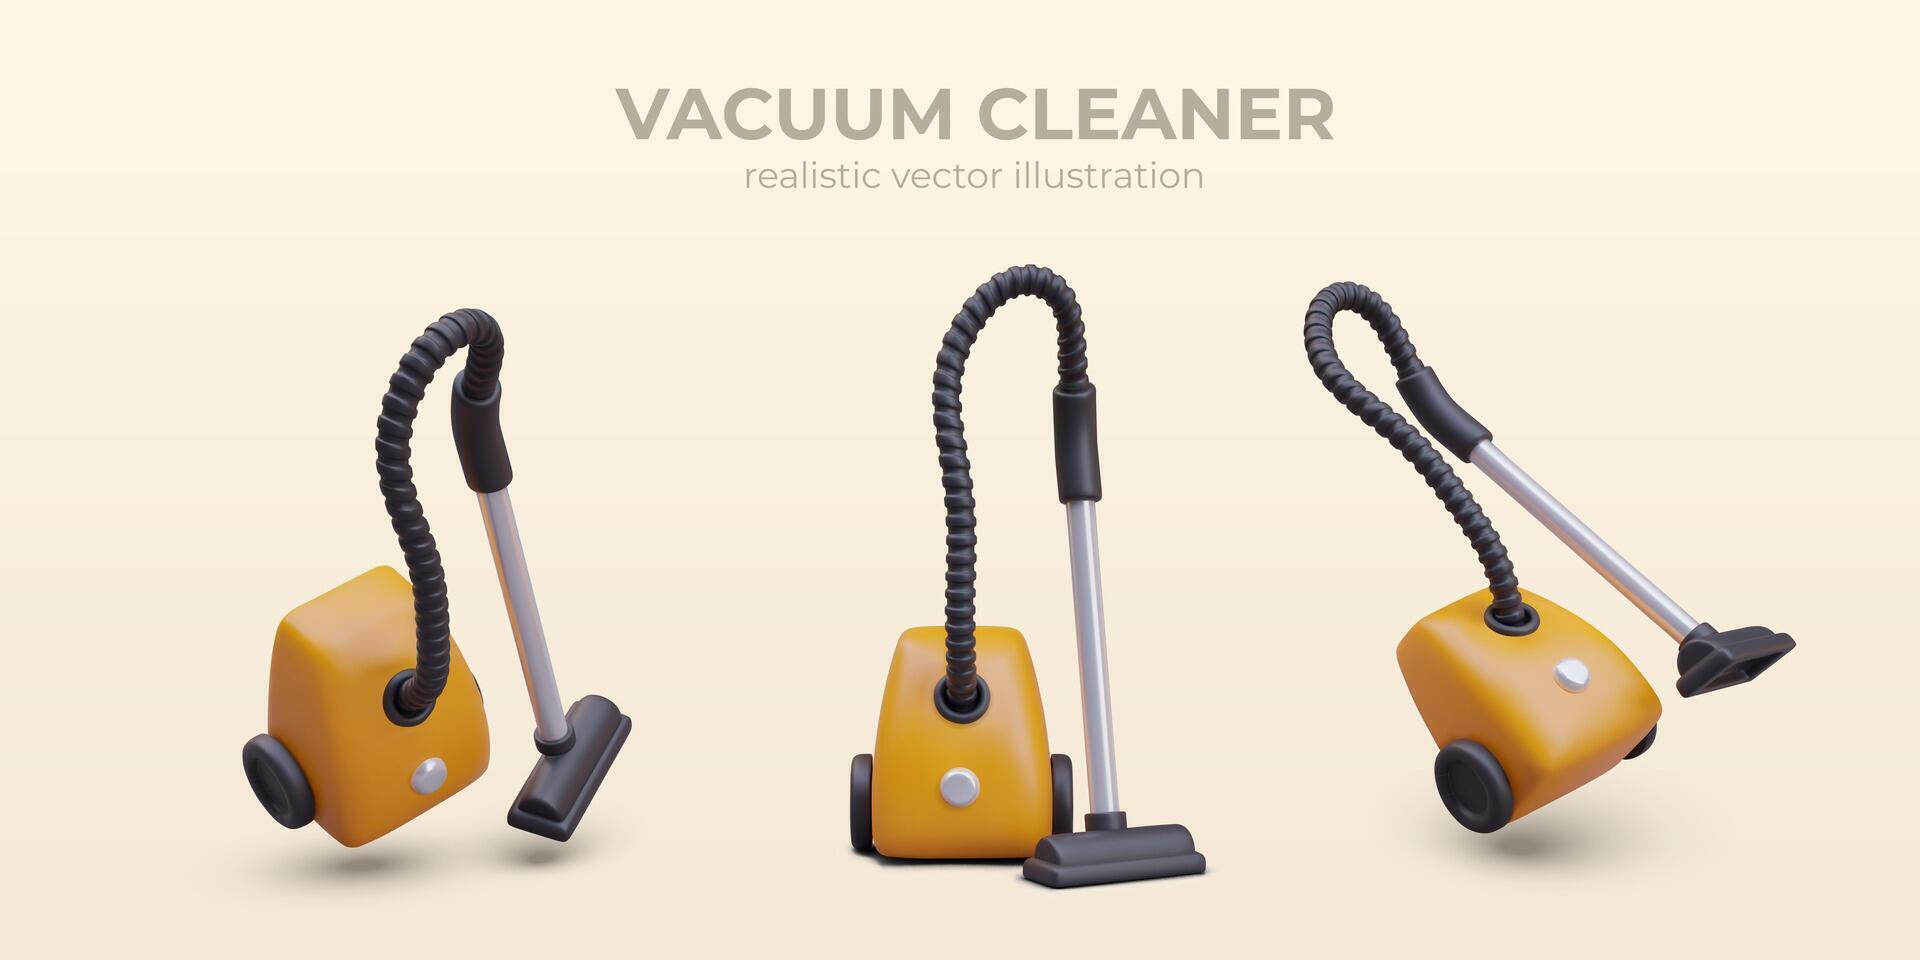 Realistic vacuum cleaners in different positions. Poster with room cleaning equipment vector